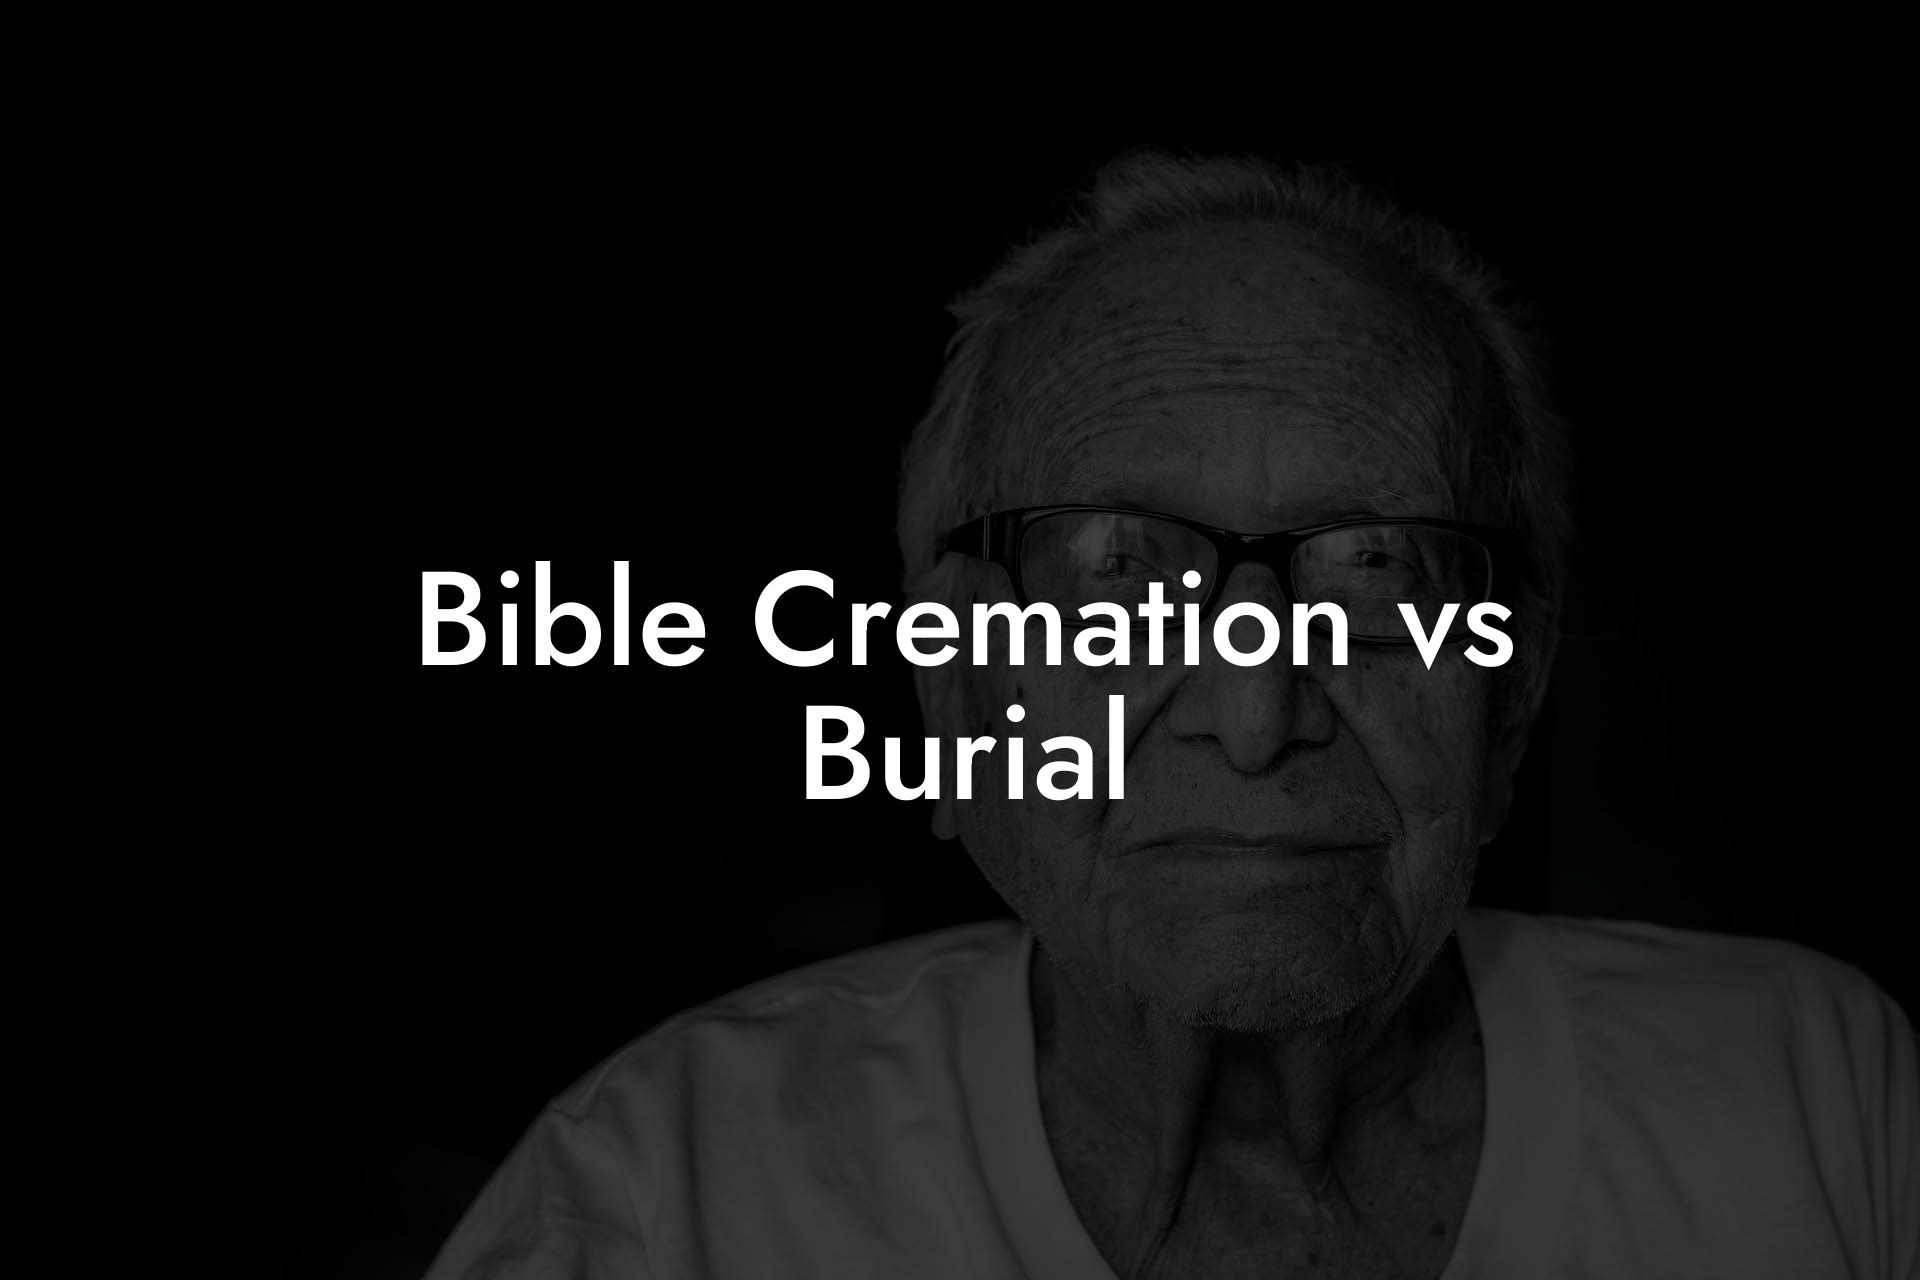 Bible Cremation vs Burial